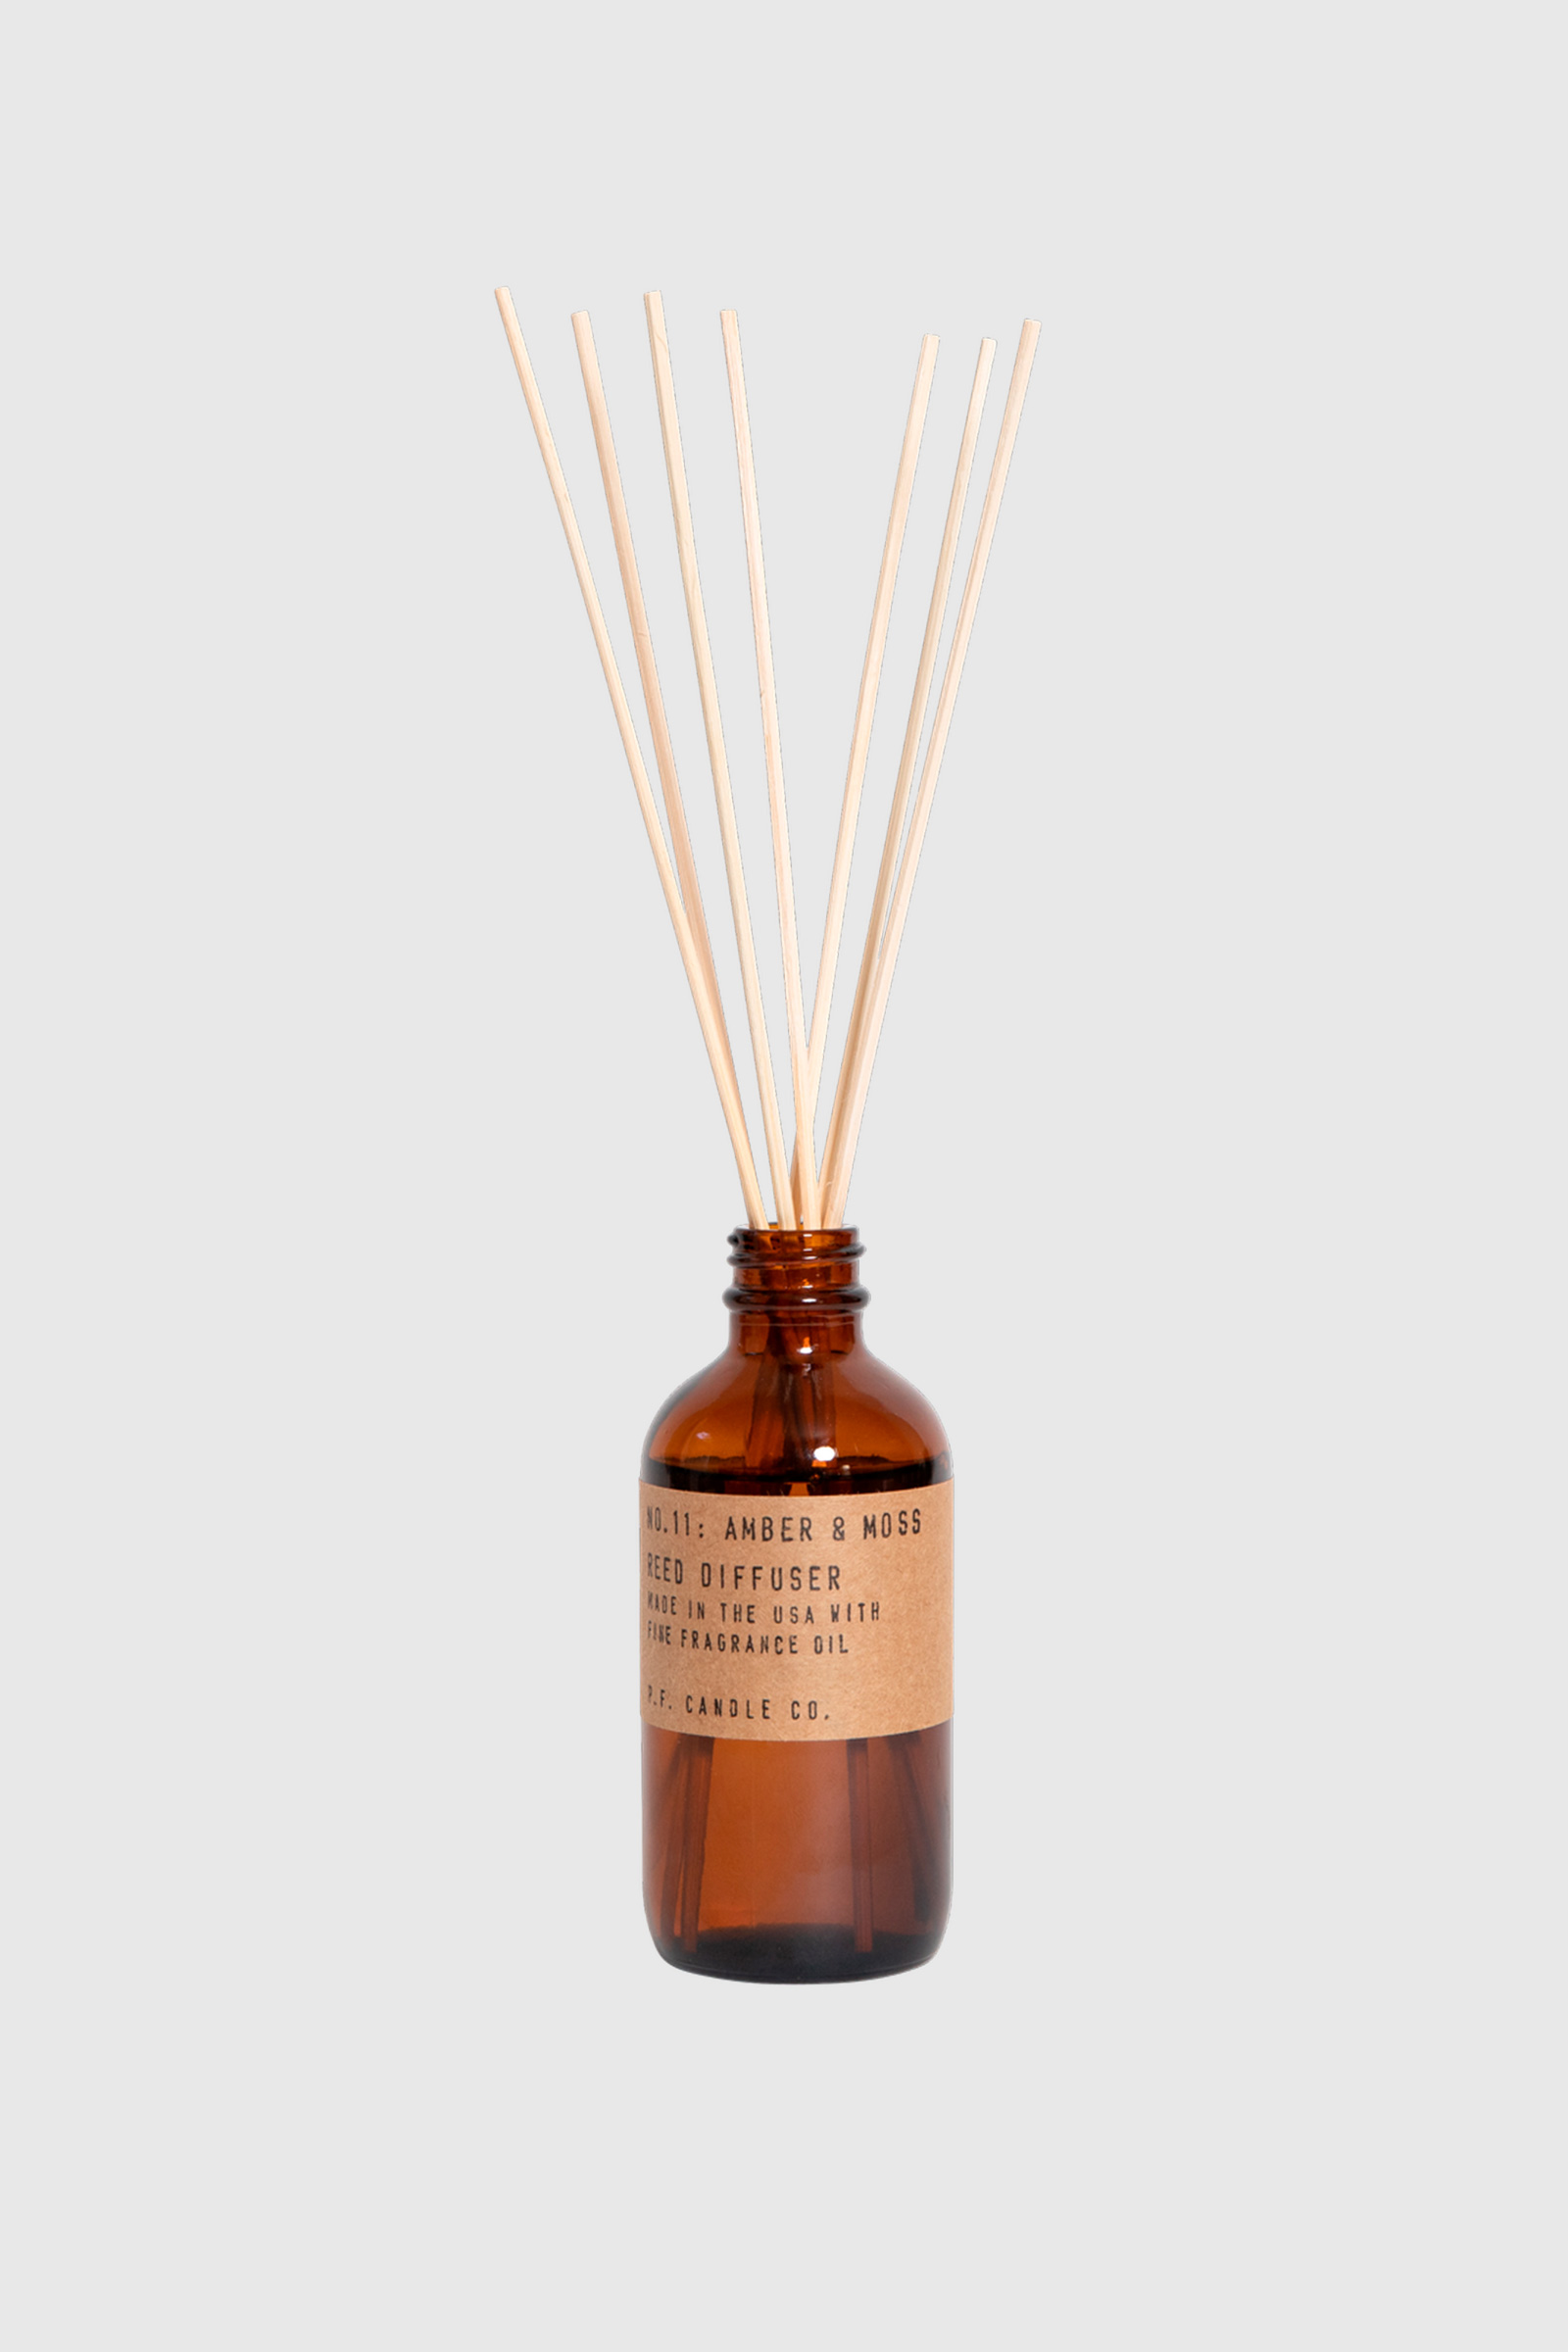 P.F. CANDLE CO. Amber & Moss Reed Diffuser Unit | WoodWood.com